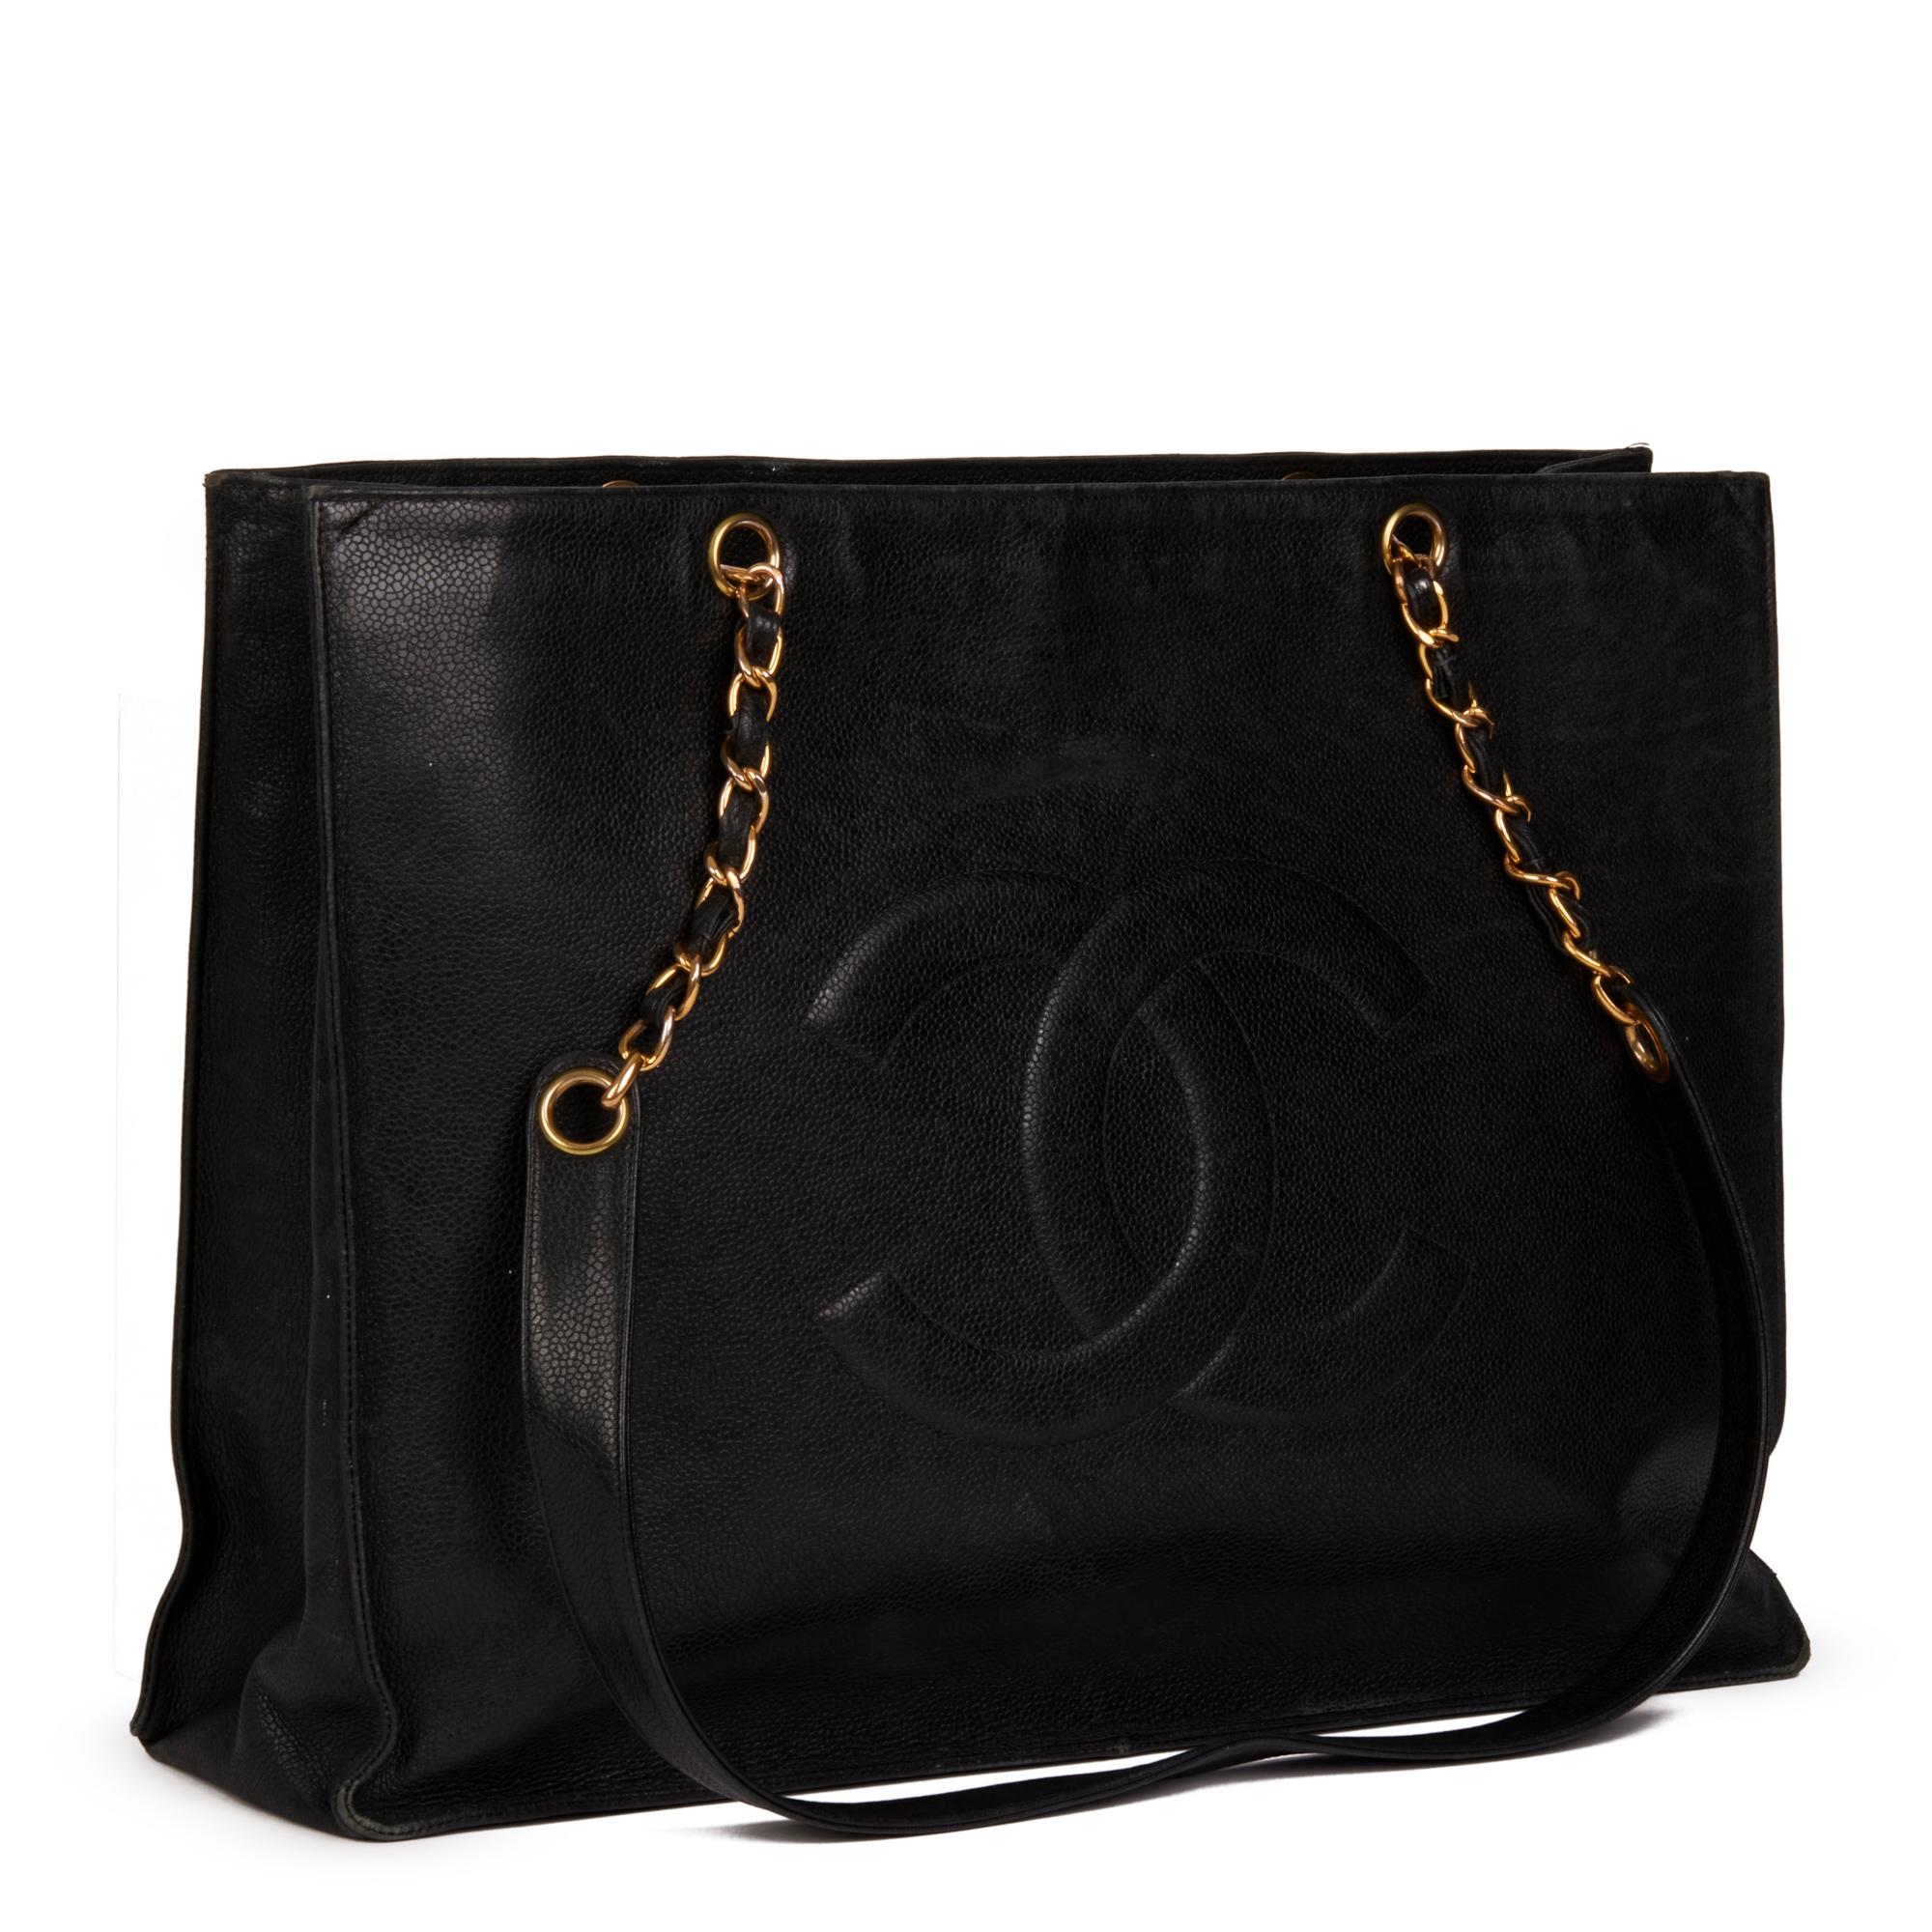 CHANEL
Black Caviar Leather Vintage Jumbo XL Timeless Shopping Tote

Serial Number: UNREADABLE
Age (Circa): 1990
Authenticity Details: (Made in France)
Gender: Ladies
Type: Shoulder, Tote

Colour: Black
Hardware: Gold
Material(s): Caviar Leather